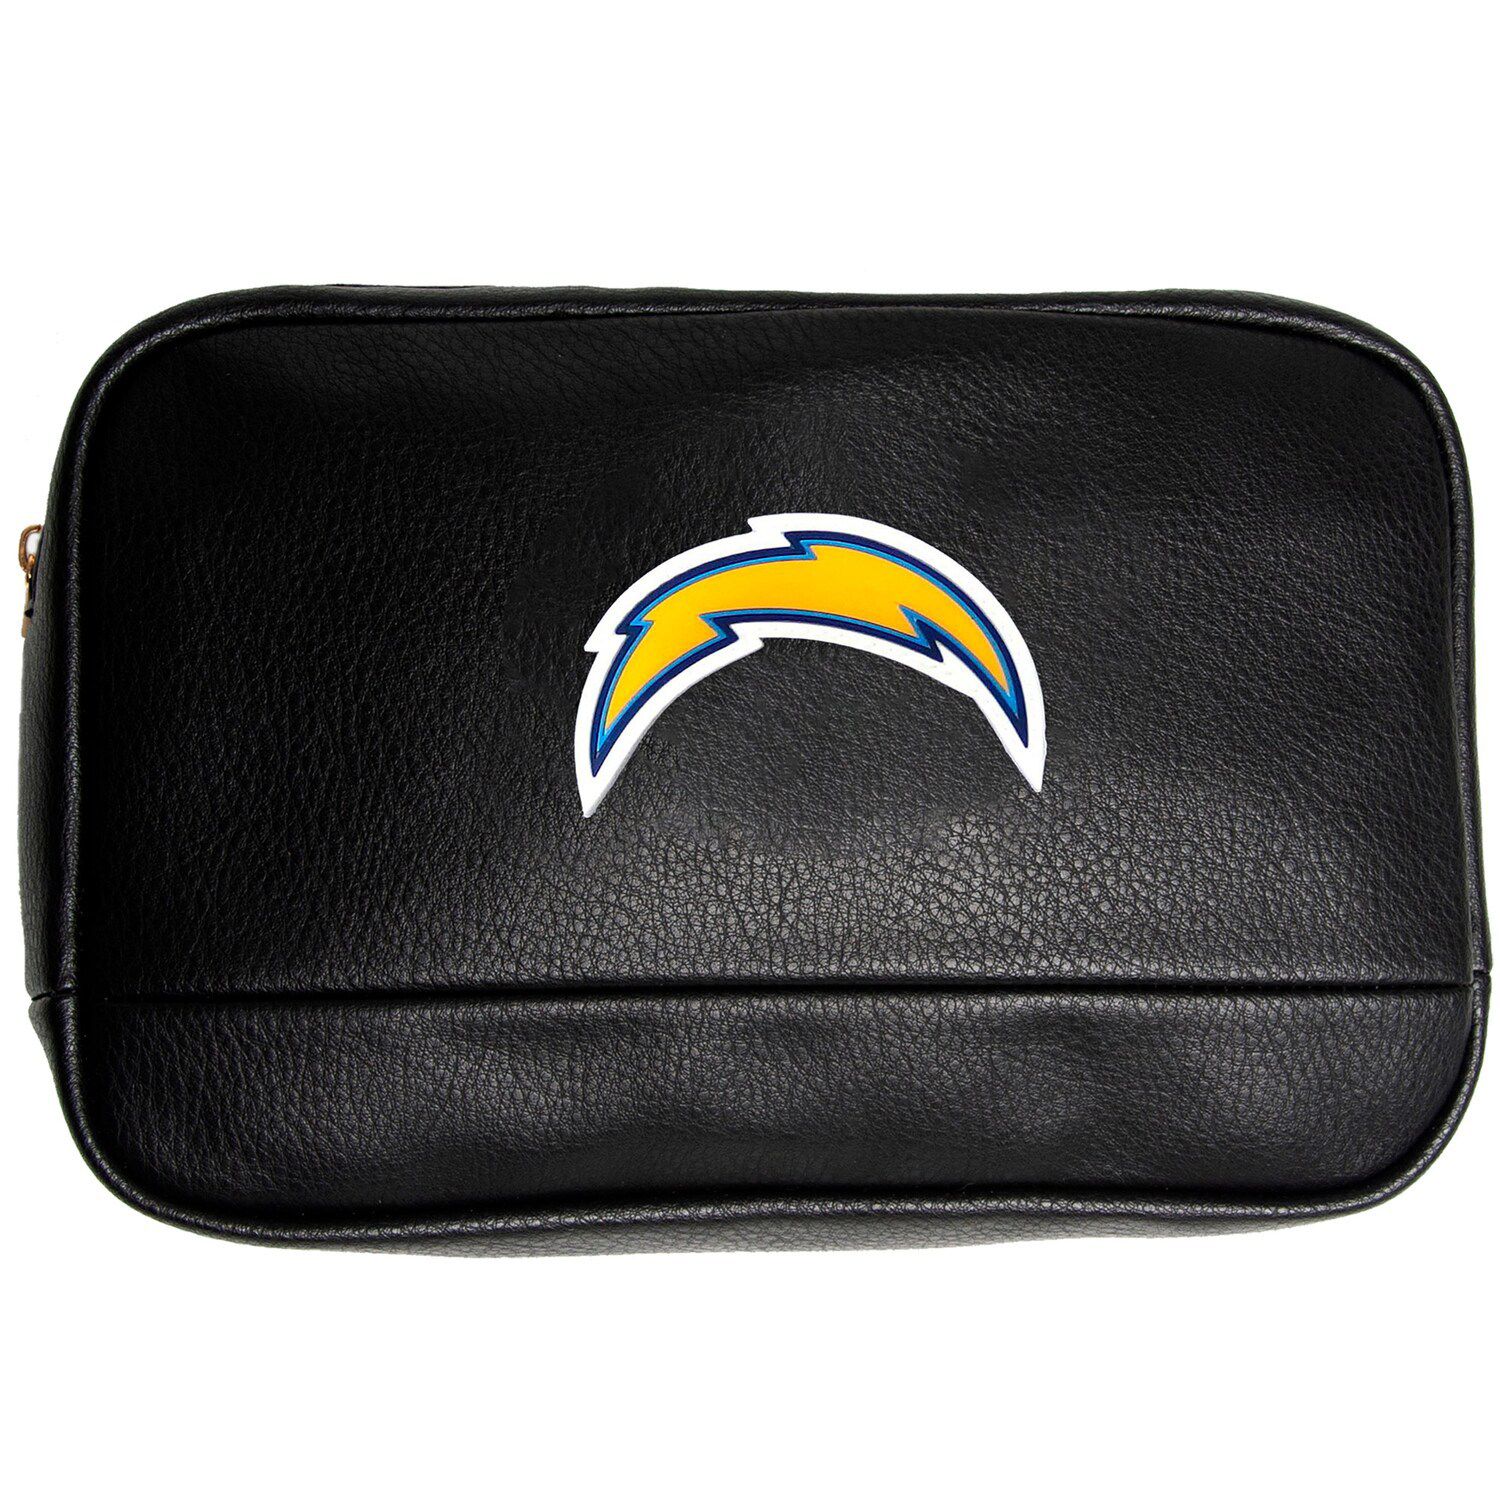 Image for Unbranded Cuce Los Angeles Chargers Cosmetic Bag at Kohl's.